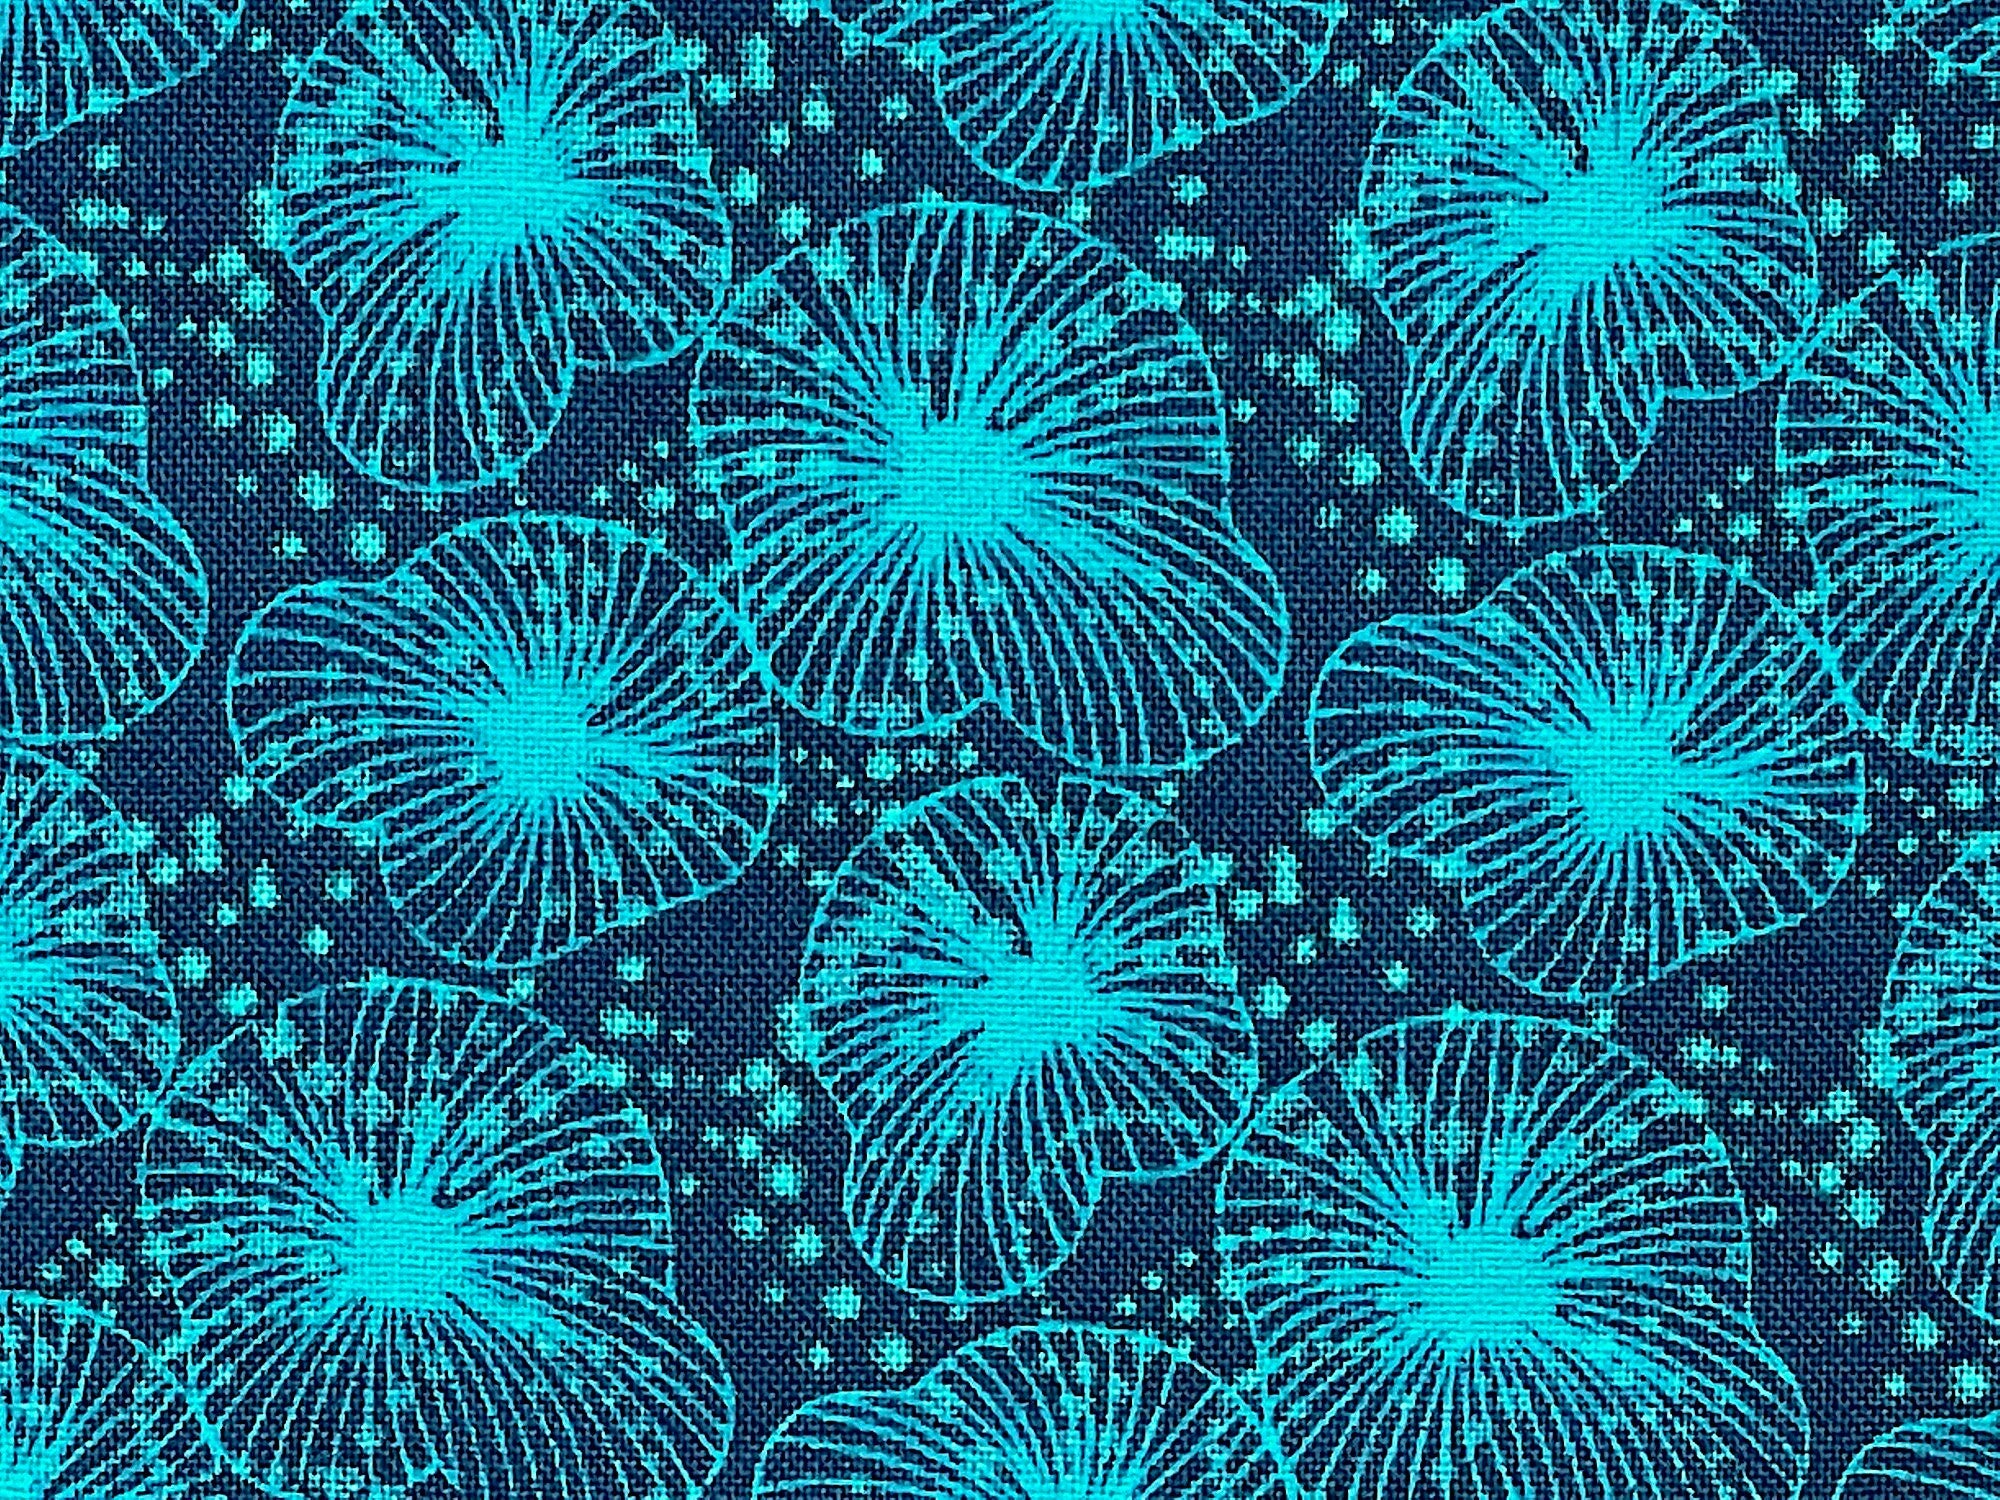 This fabric is part of the Koi Garden collection by Nancy Archer. This dark teal cotton fabric is covered with textured lily pads